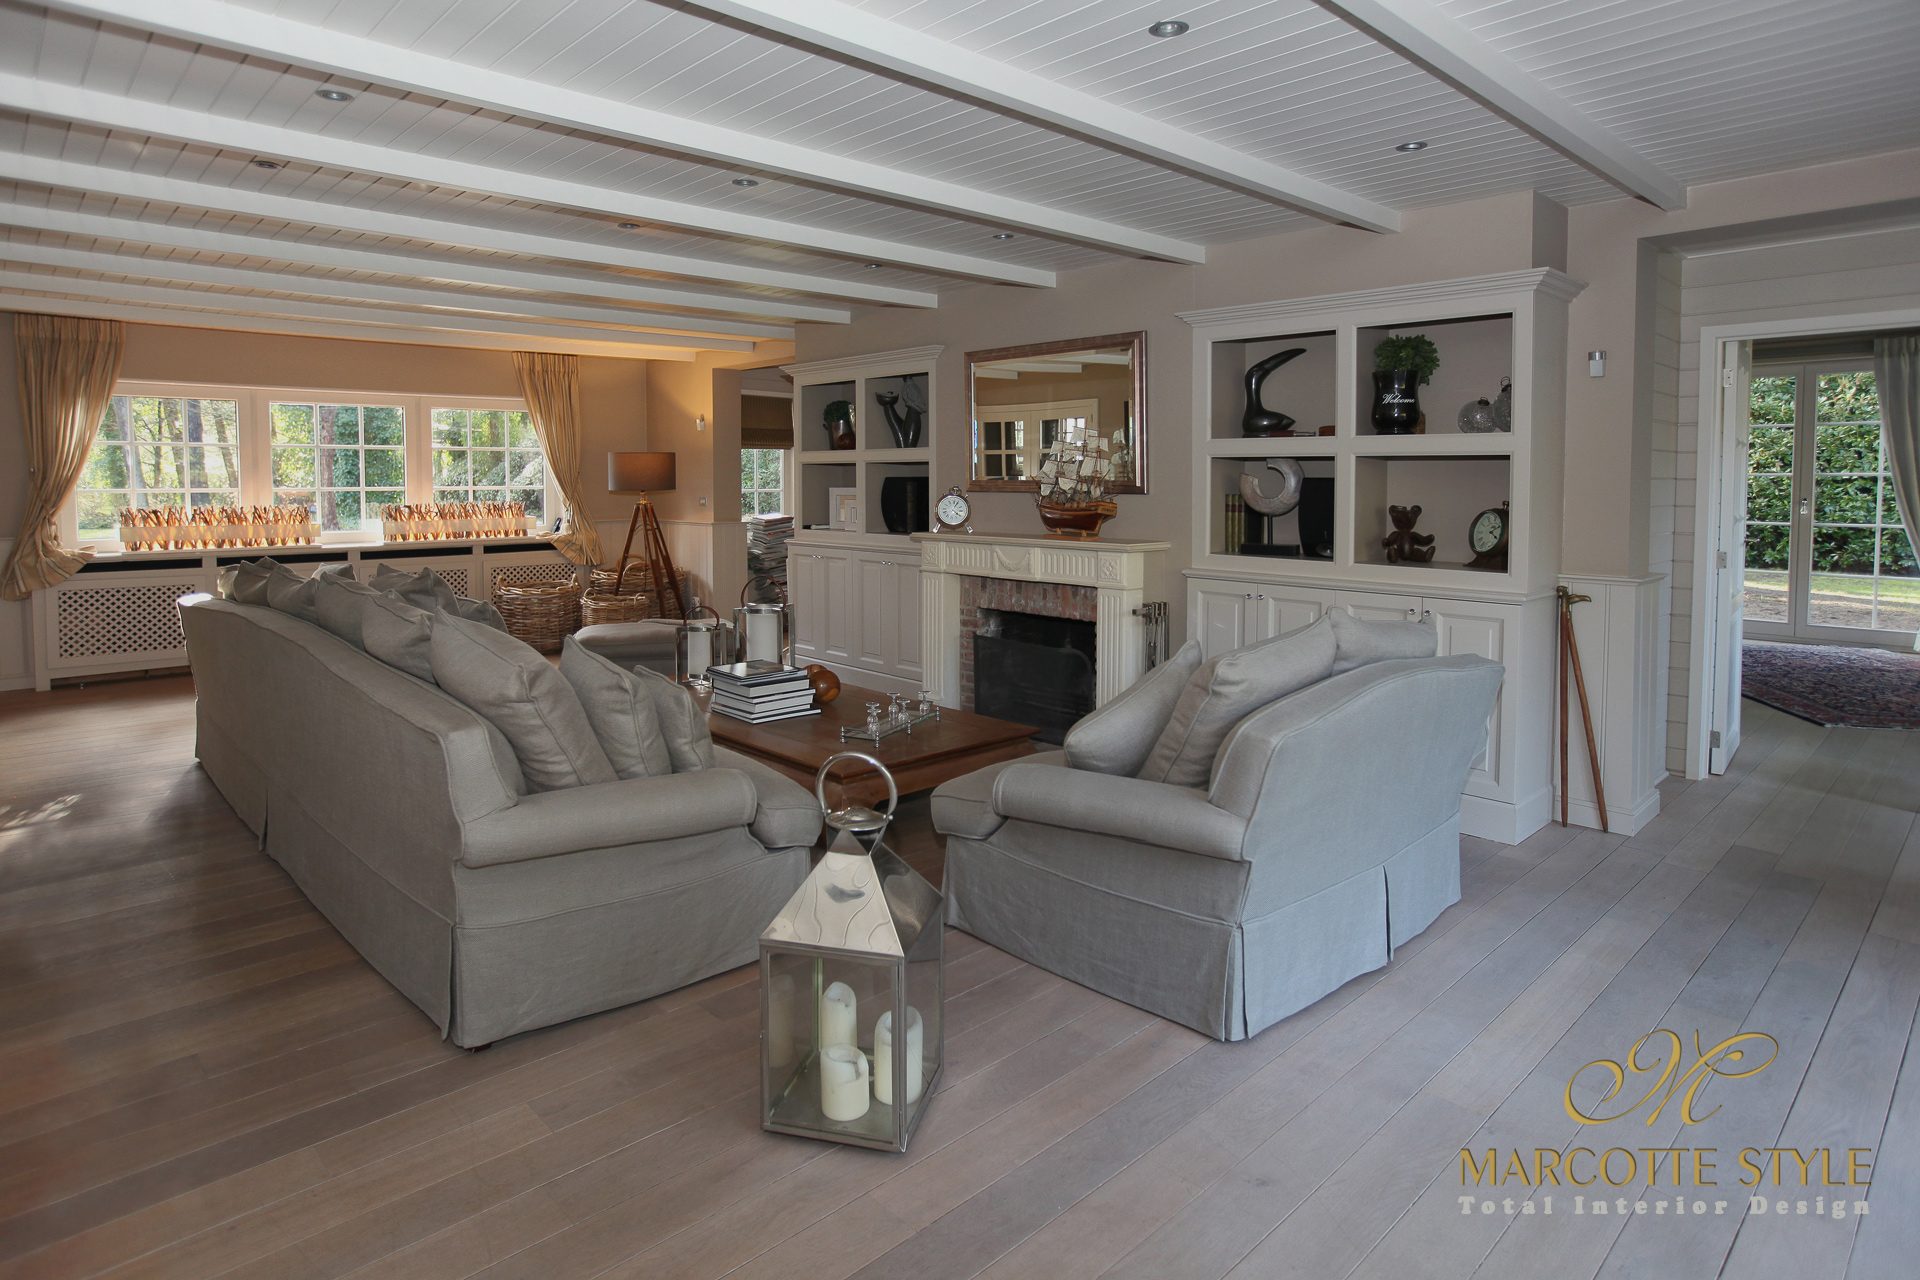 interior architect country style - Marcotte Style